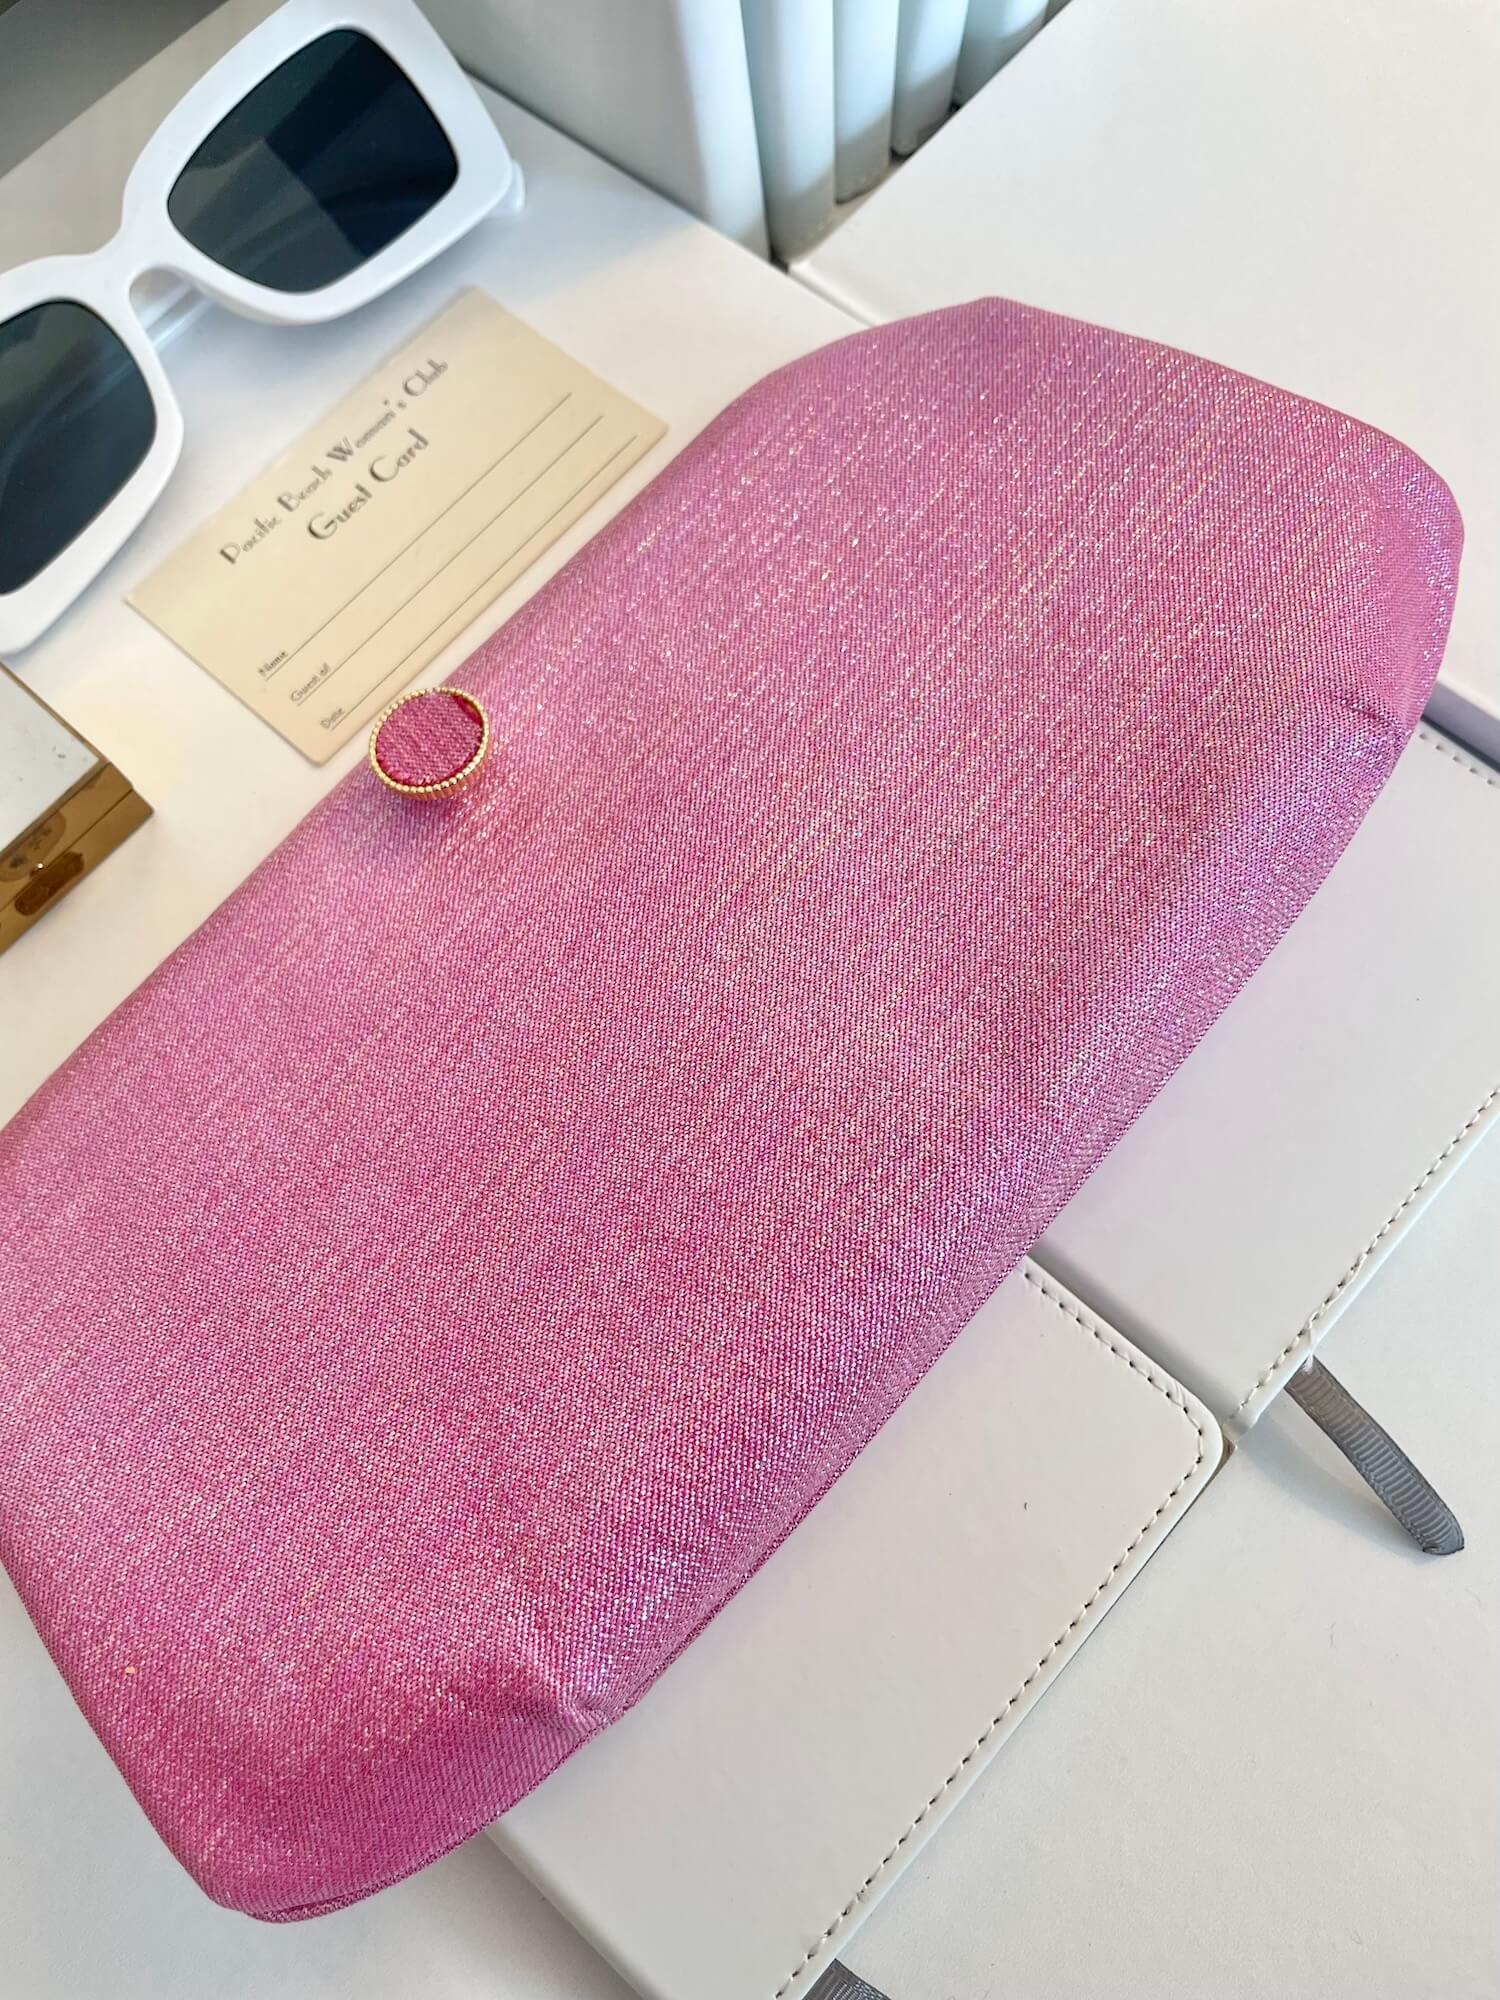 Flirty gal 1960's pink lame clutch bag...what a color!